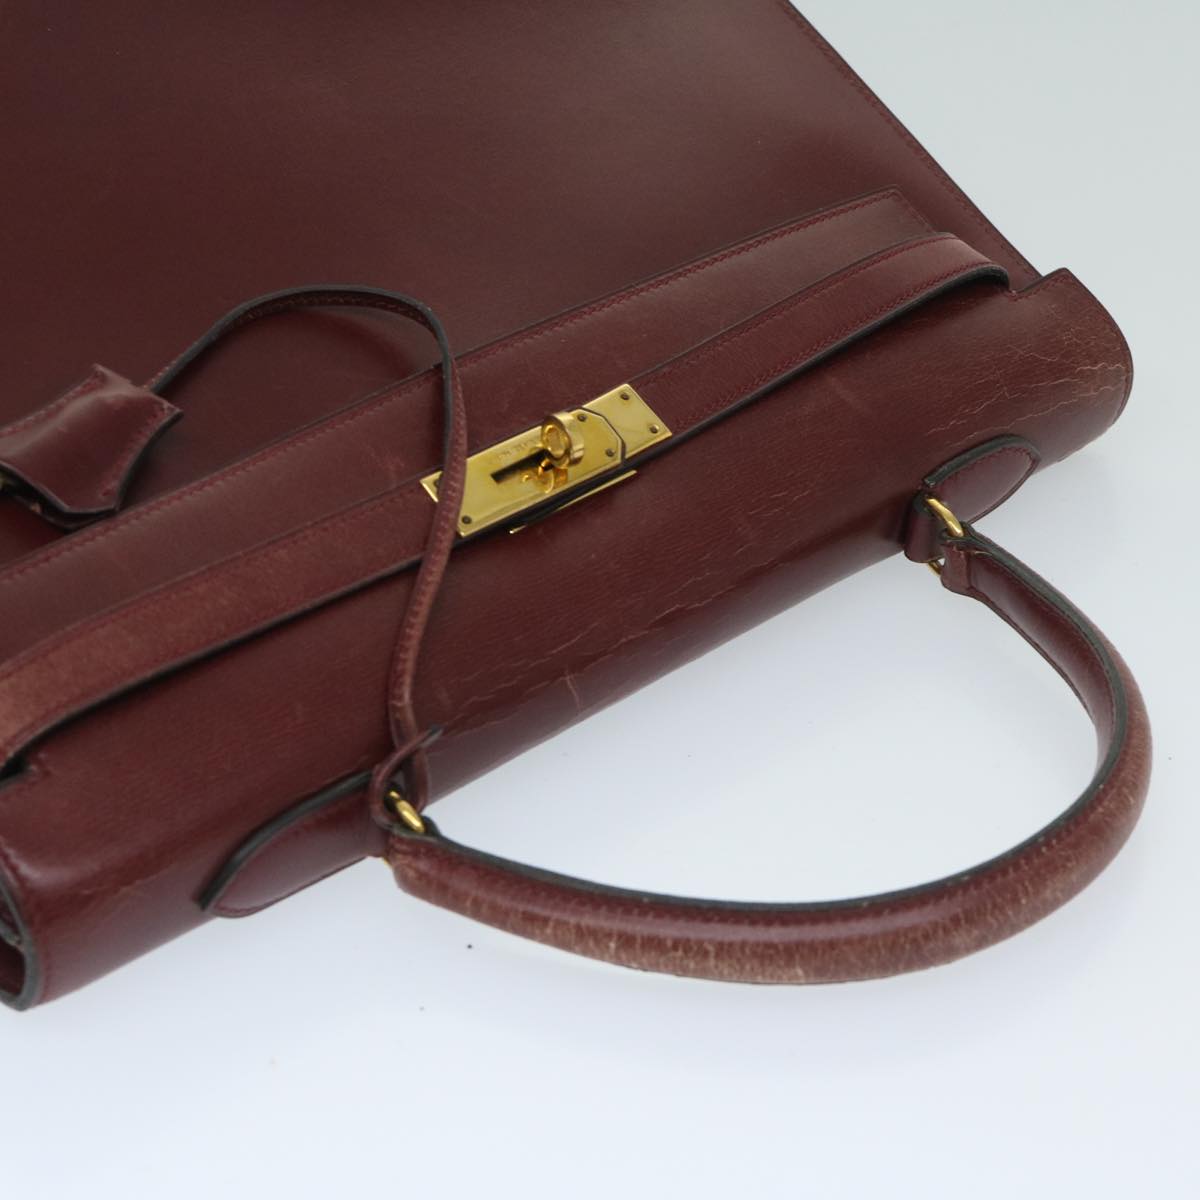 HERMES Kelly 35 Hand Bag Leather Bordeaux Auth 68891